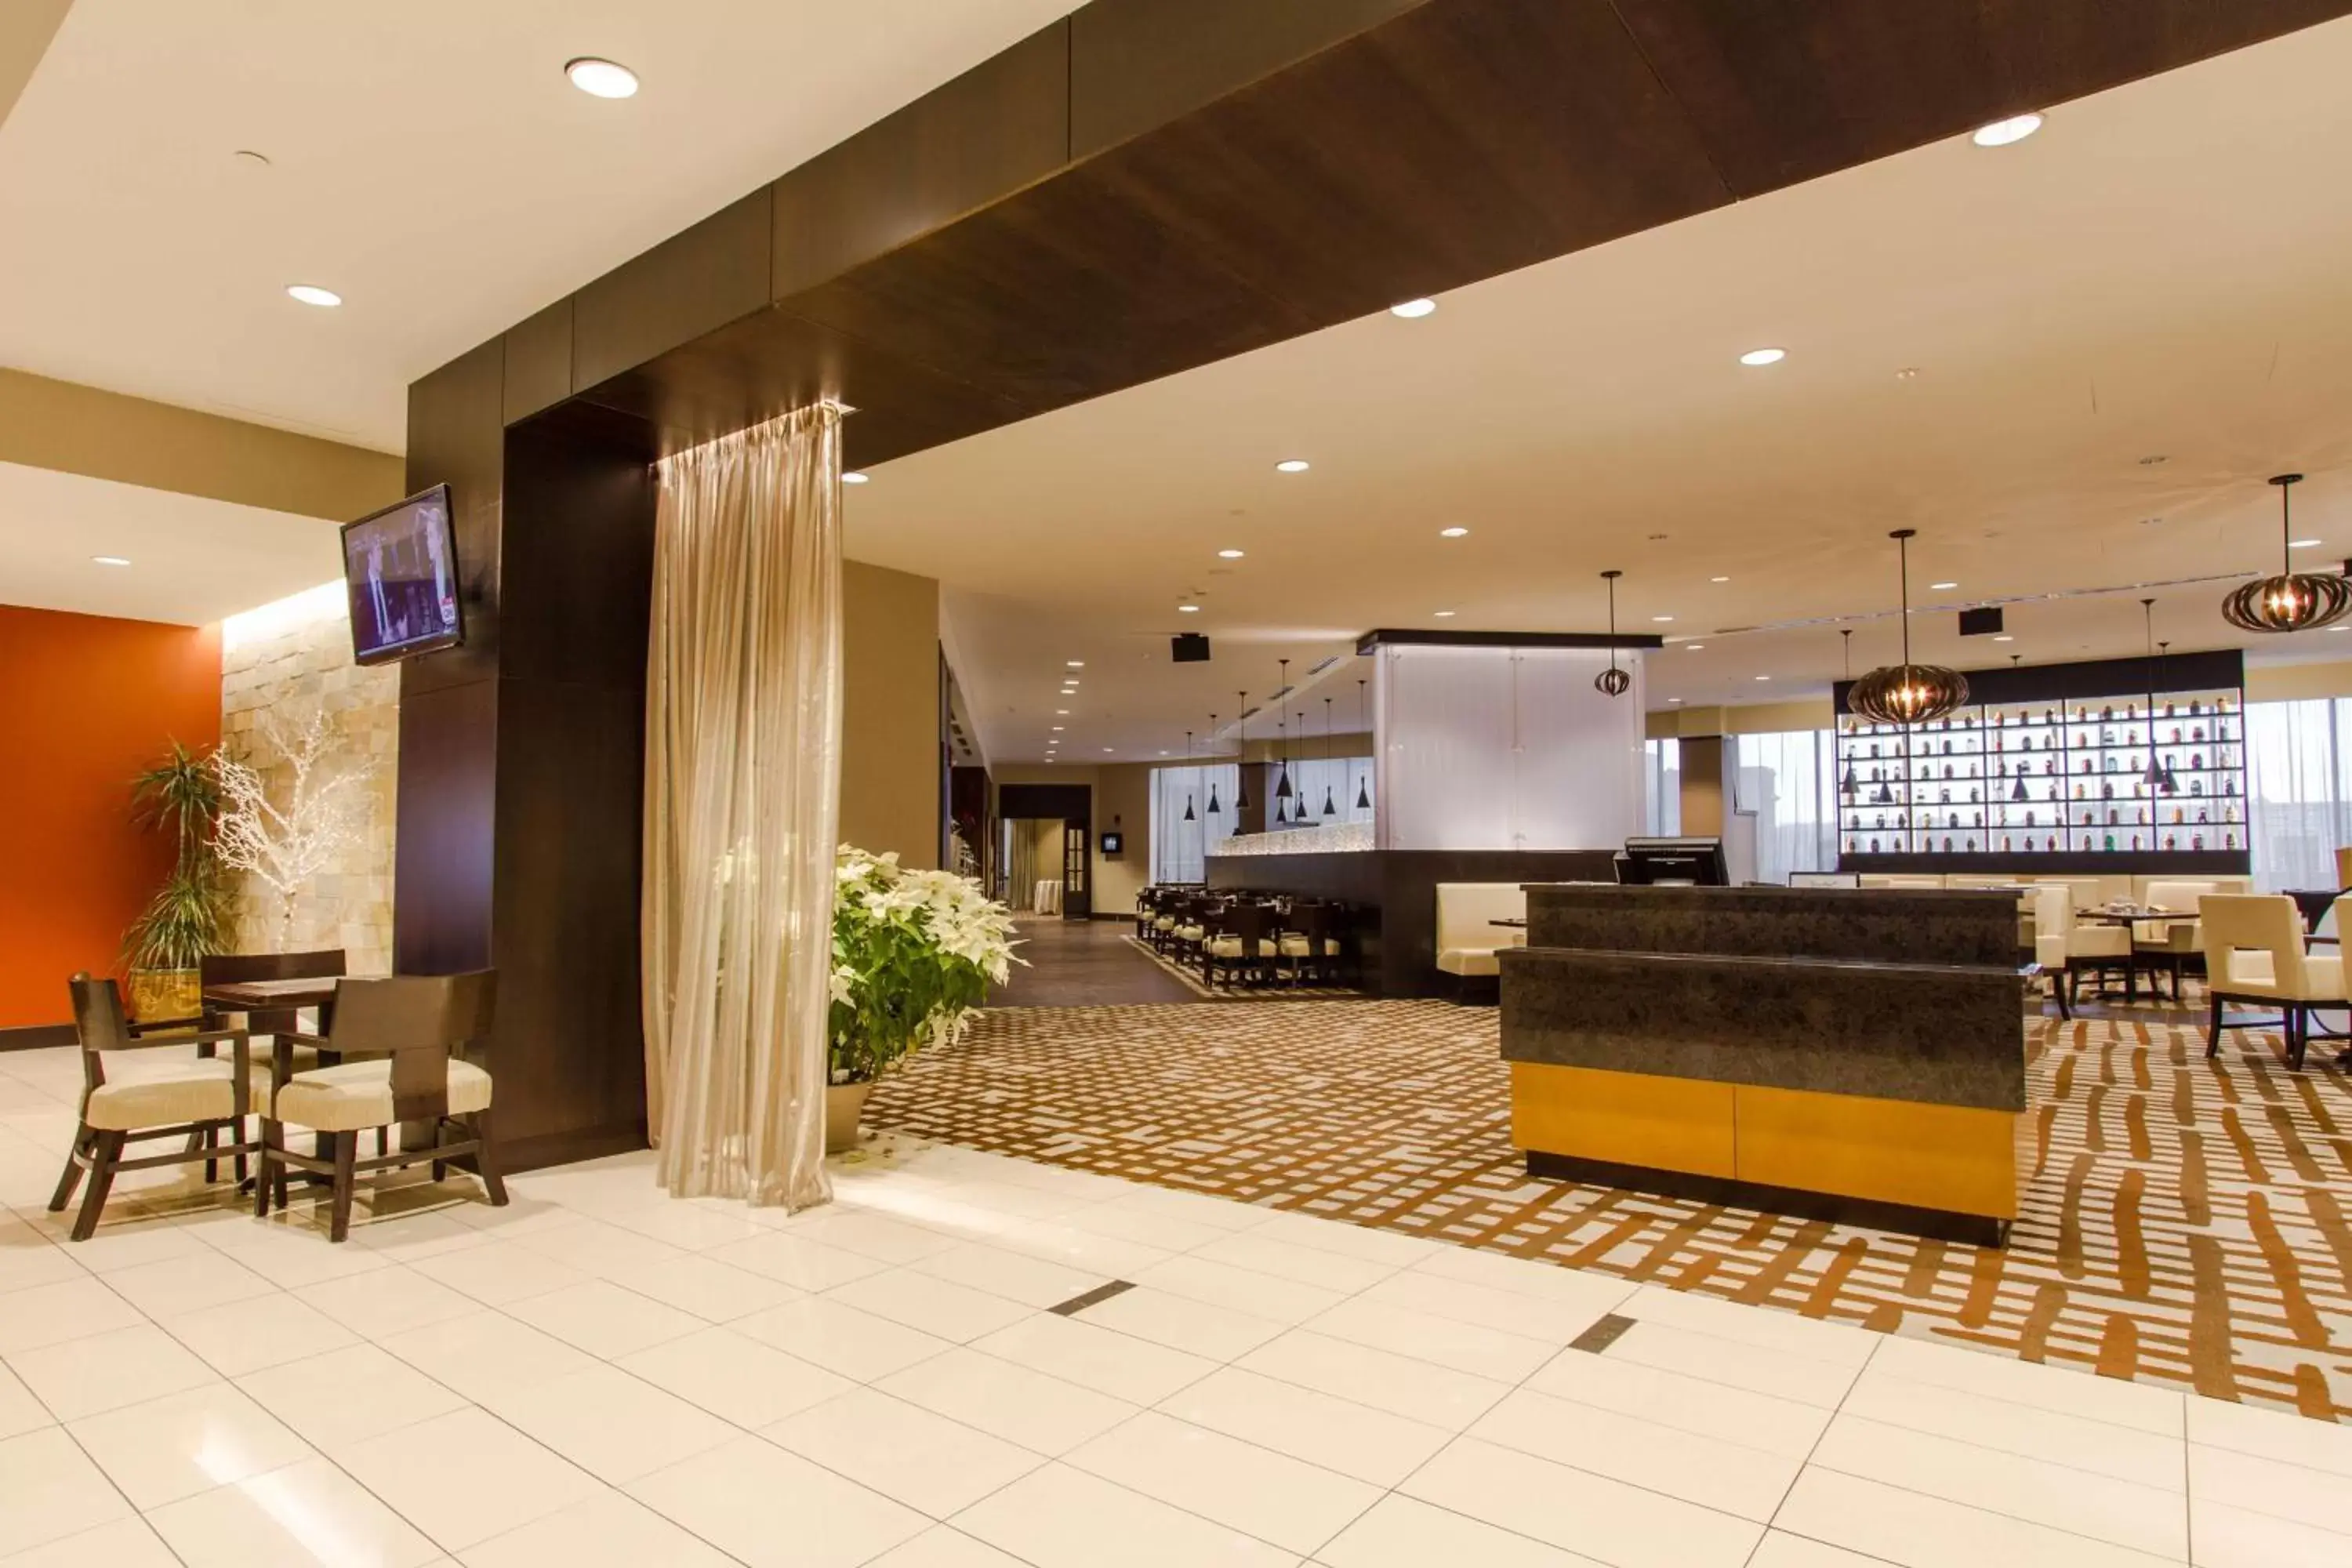 Restaurant/places to eat, Lobby/Reception in Hilton Albany